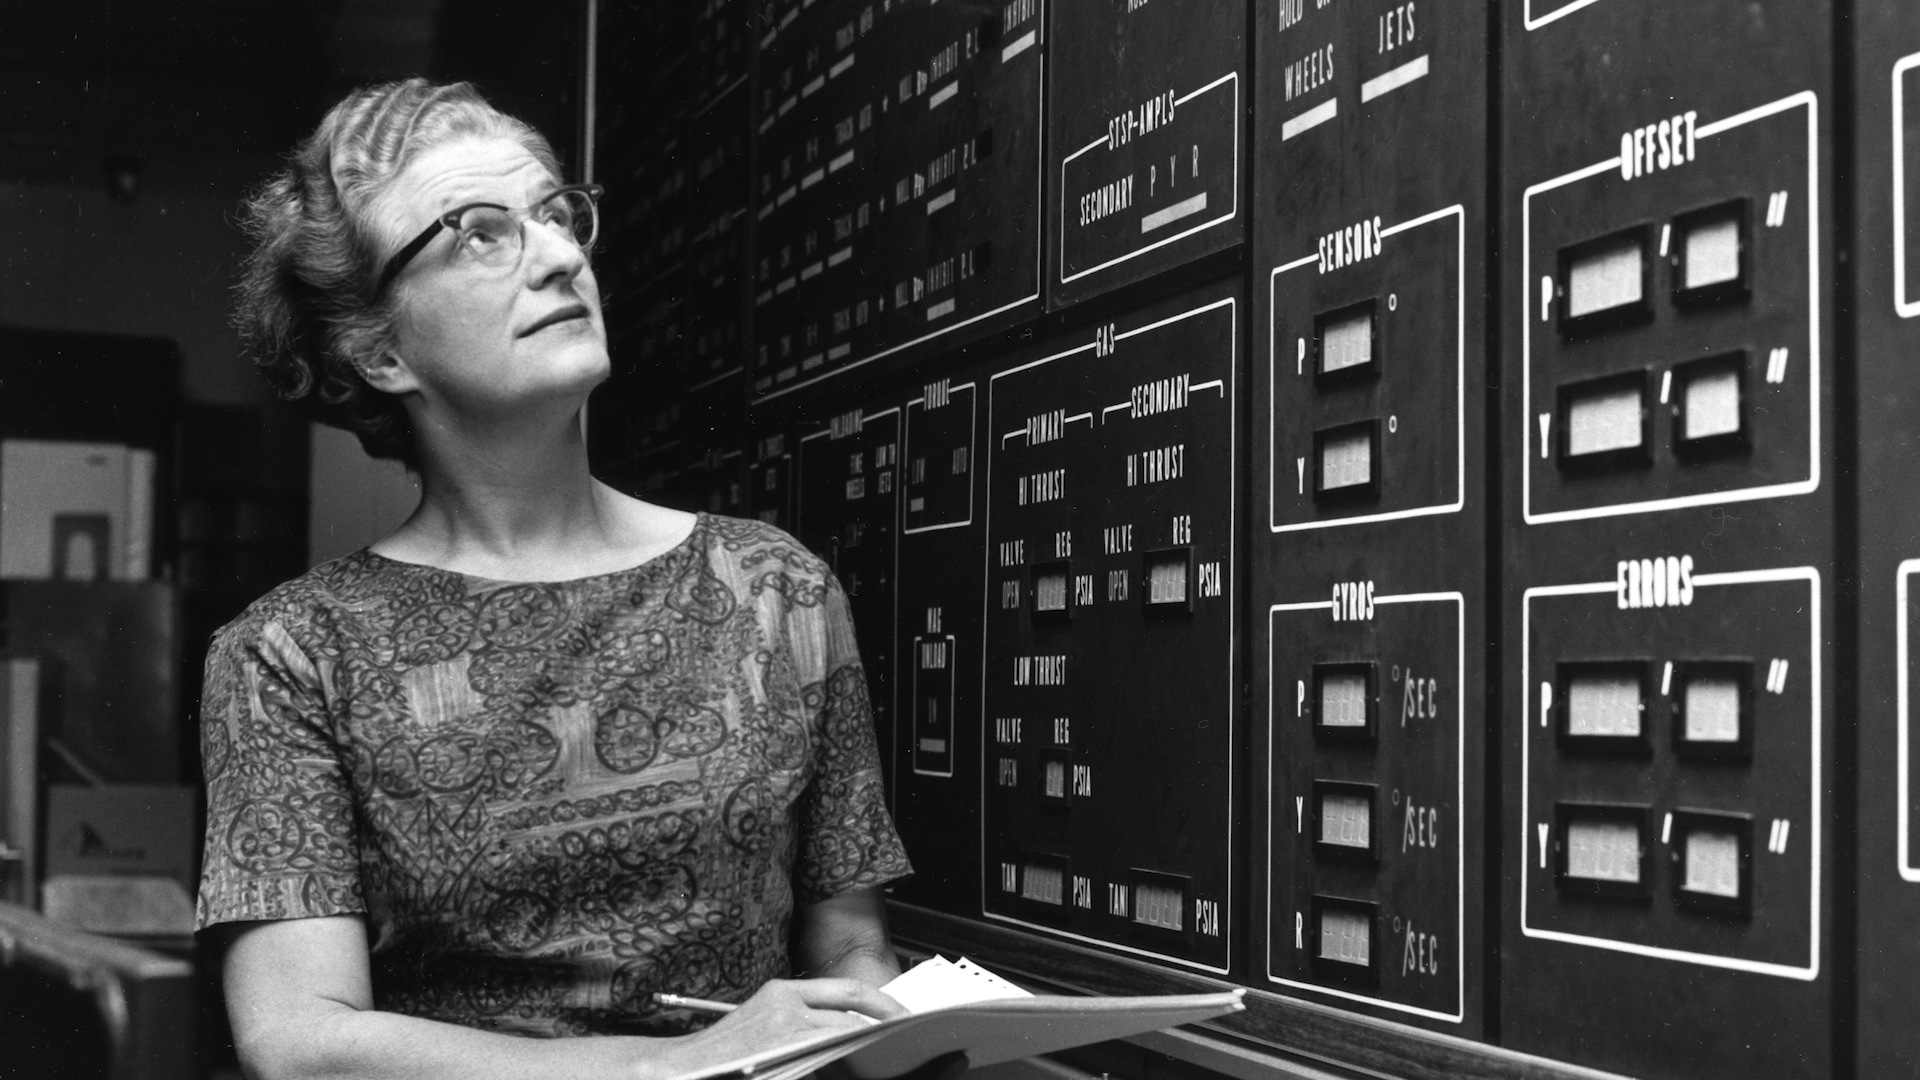 Nancy Grace Roman, shown here at NASA's Goddard Space Flight Center in approximately 1972, was the first female executive and the first Chief of Astronomy at NASA.